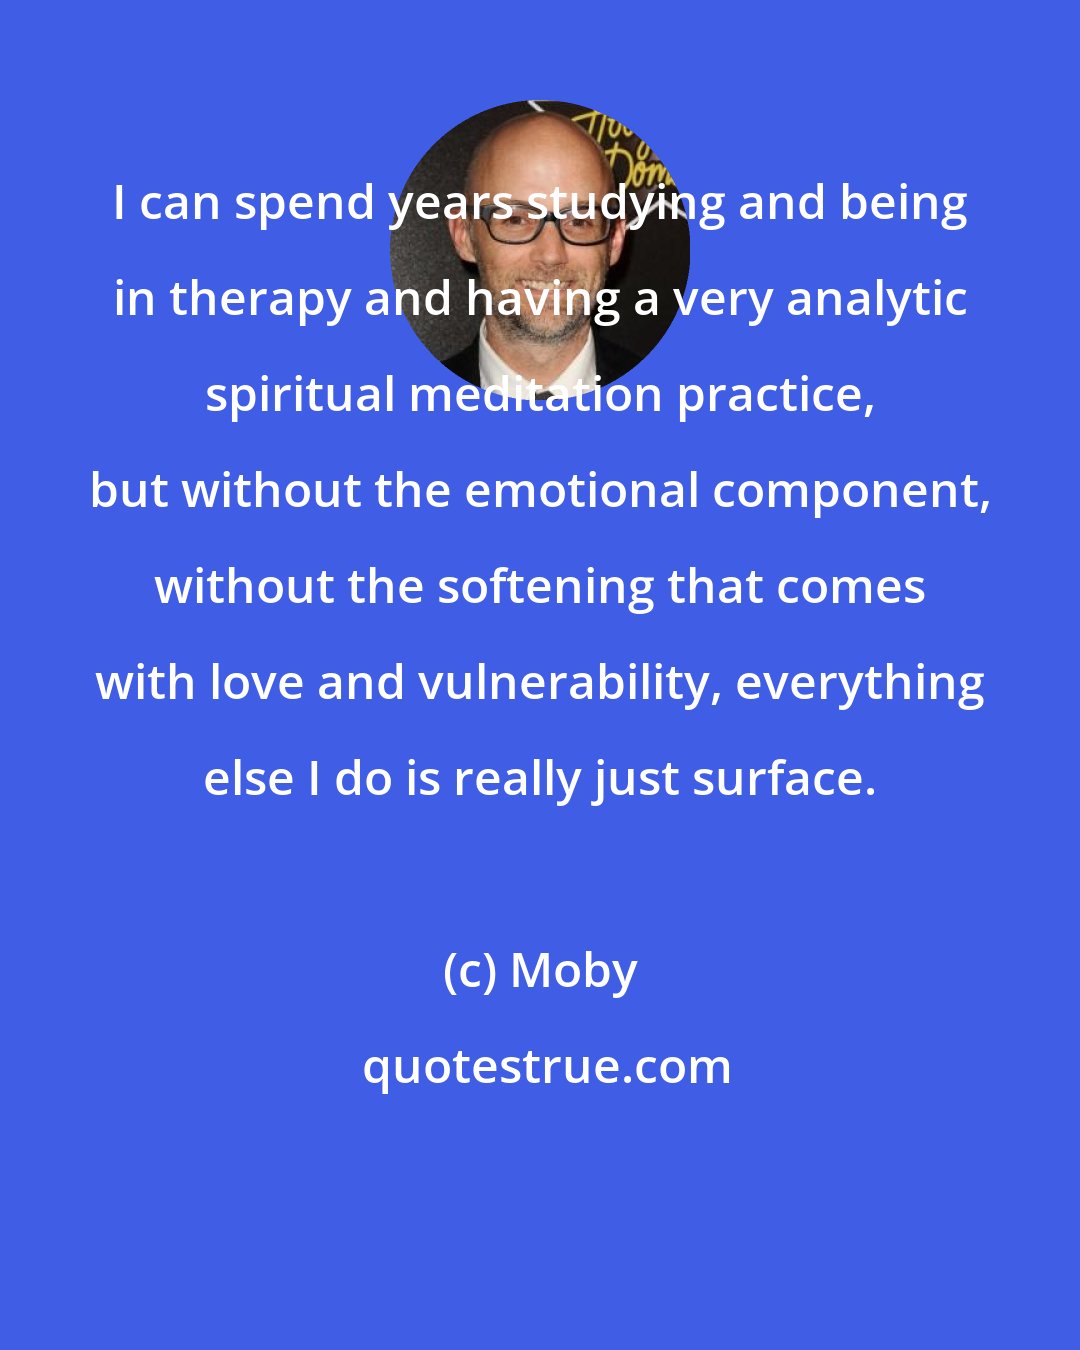 Moby: I can spend years studying and being in therapy and having a very analytic spiritual meditation practice, but without the emotional component, without the softening that comes with love and vulnerability, everything else I do is really just surface.